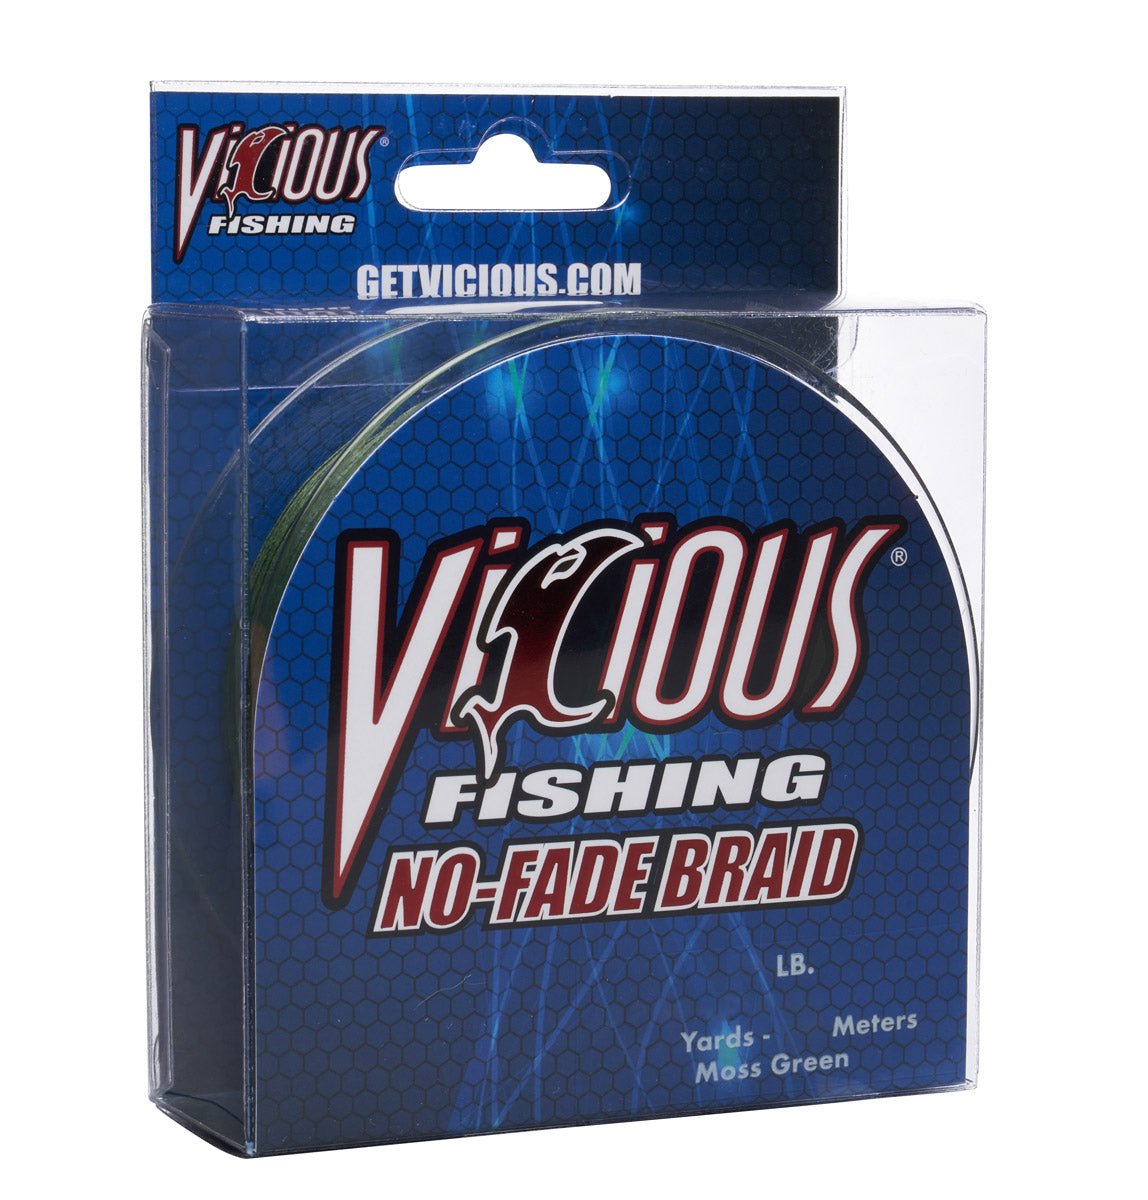 Ever Used Vicious Fishing Line? - Fishing Rods, Reels, Line, and